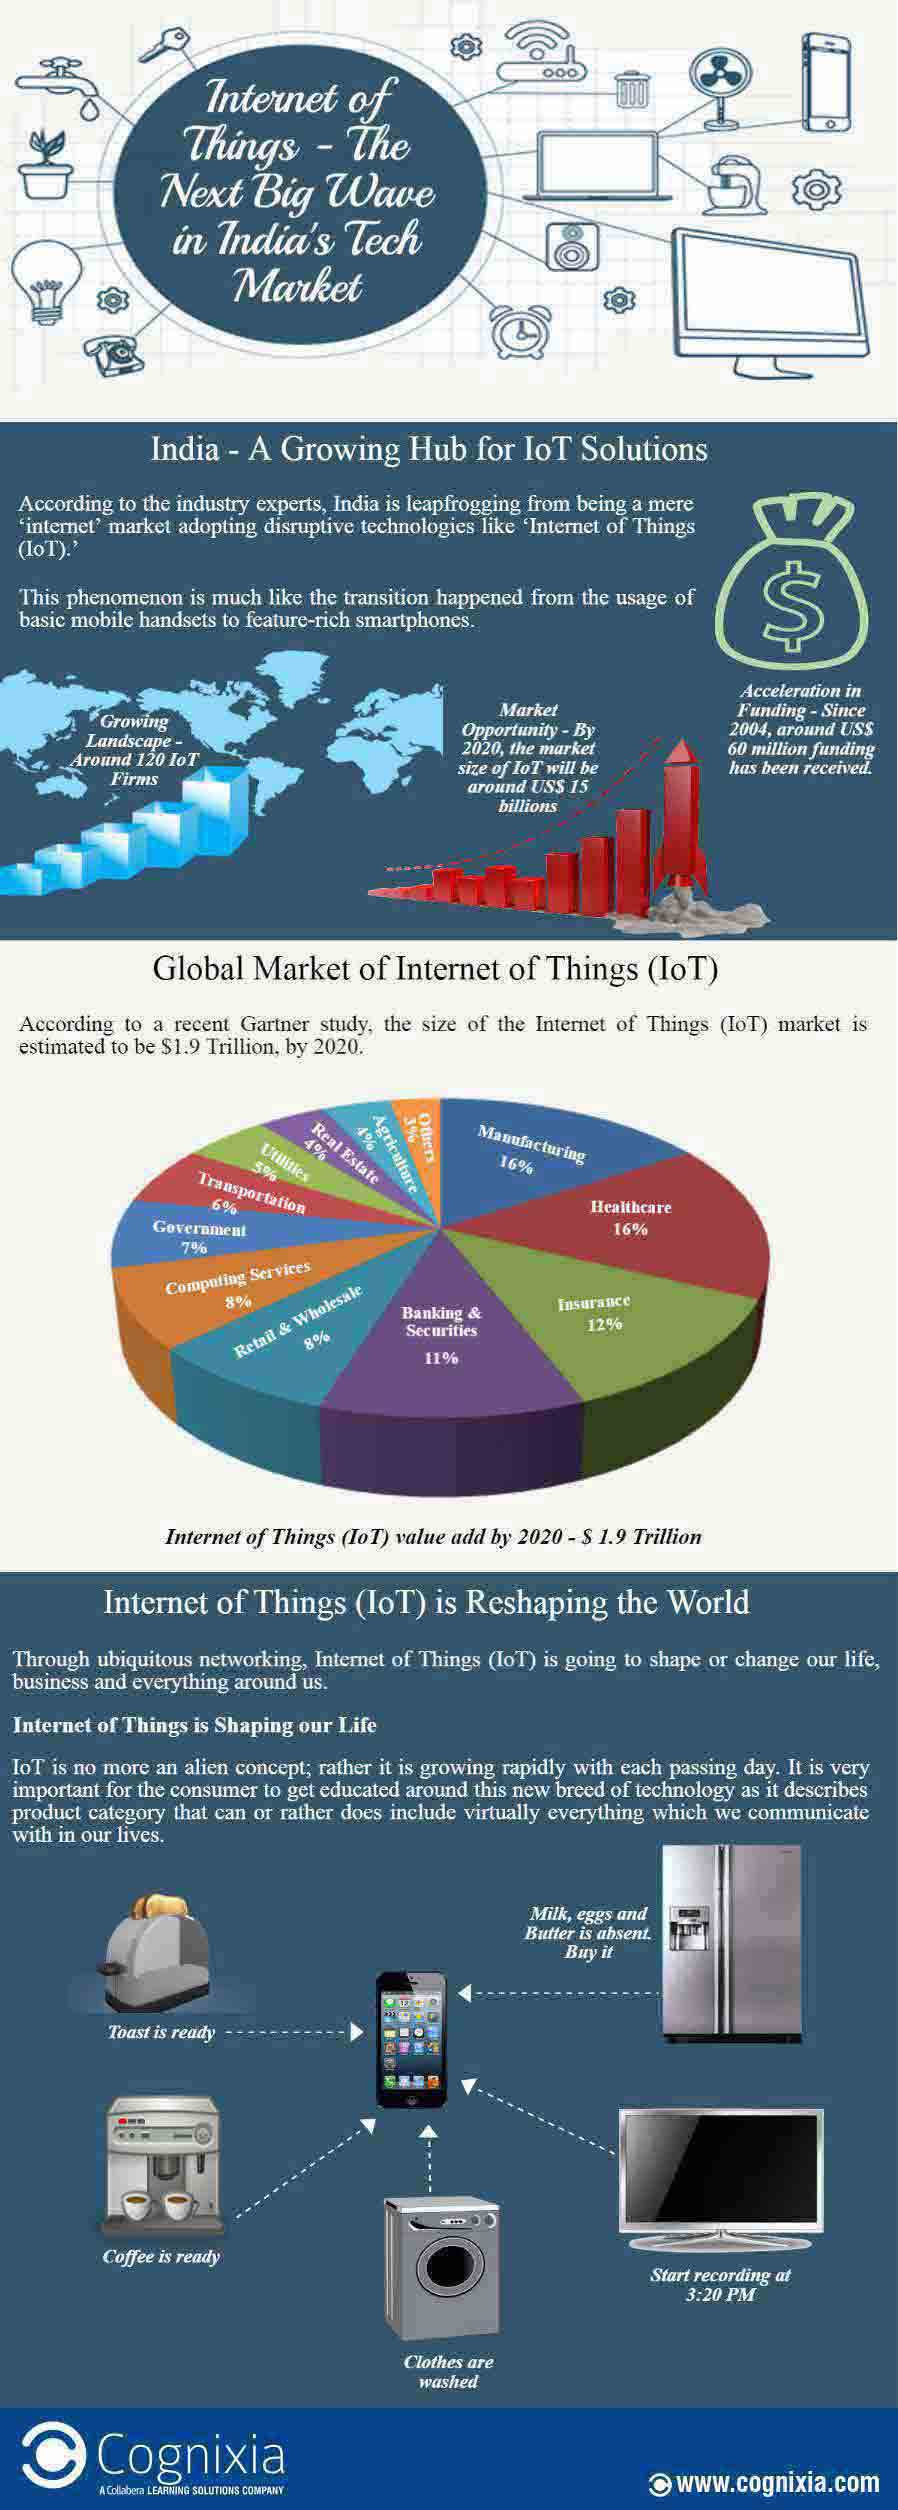 Internet of Things (IoT) - The Next Big Wave in India’s Tech Market